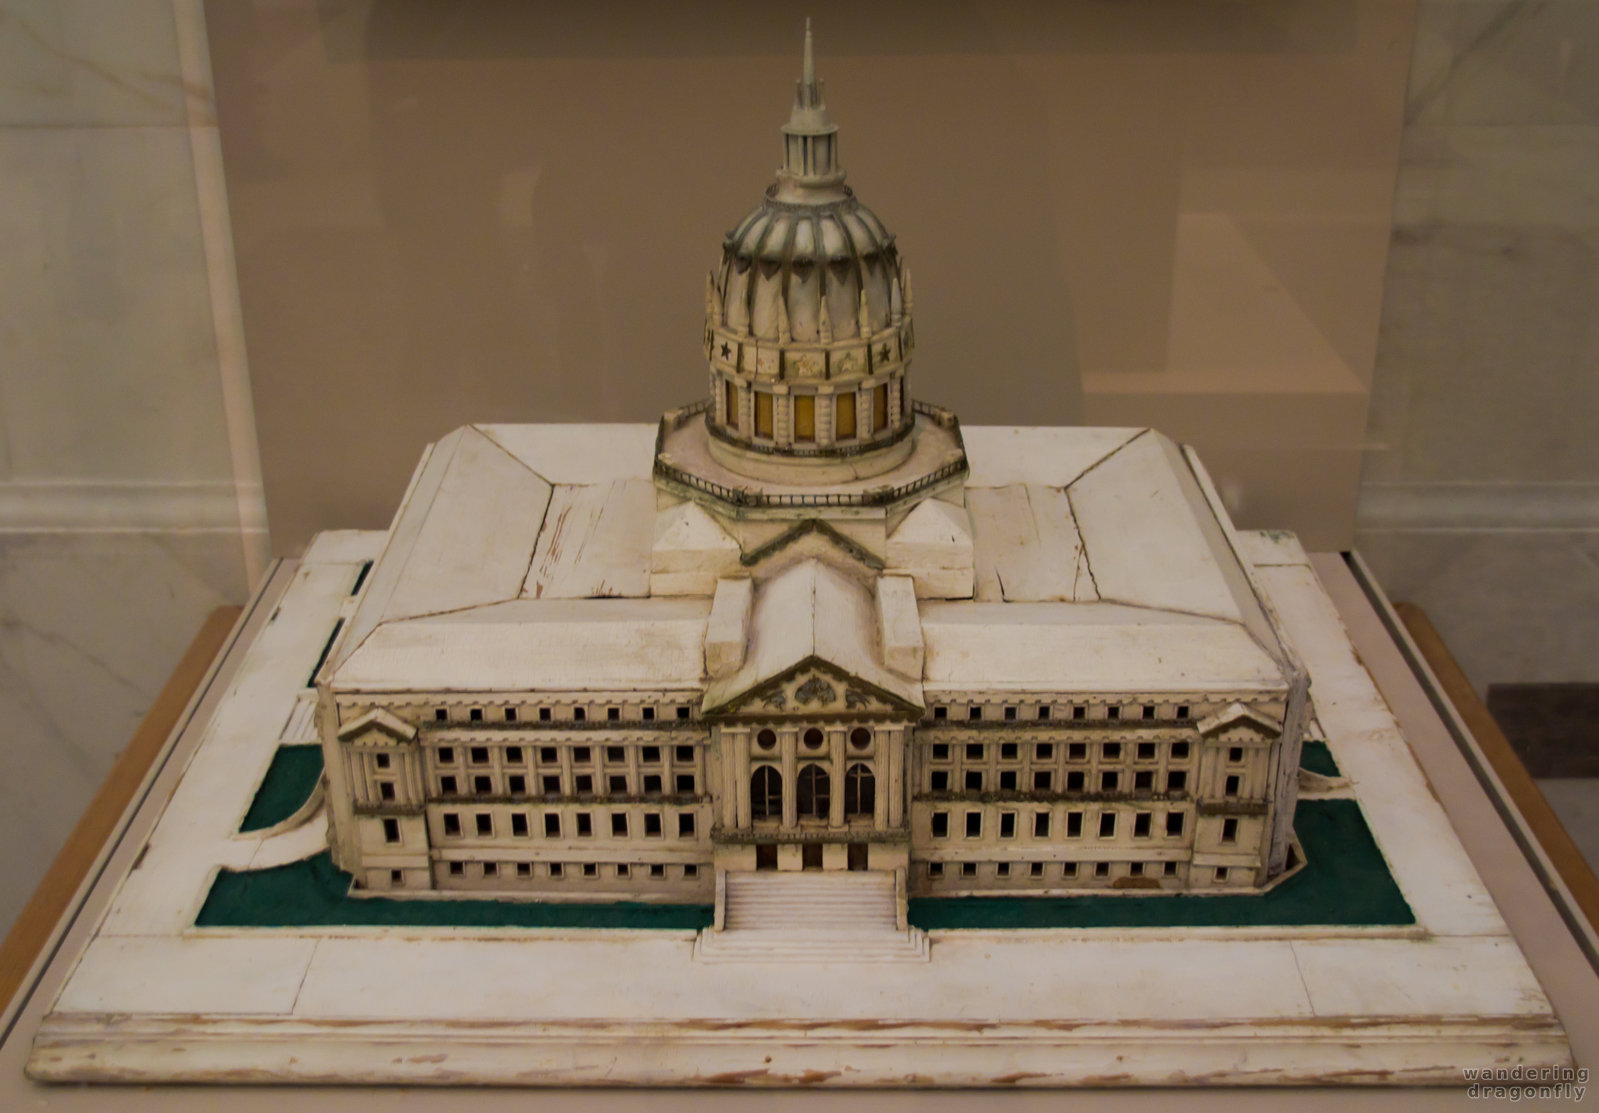 The mock-up of the San Francisco City Hall -- model